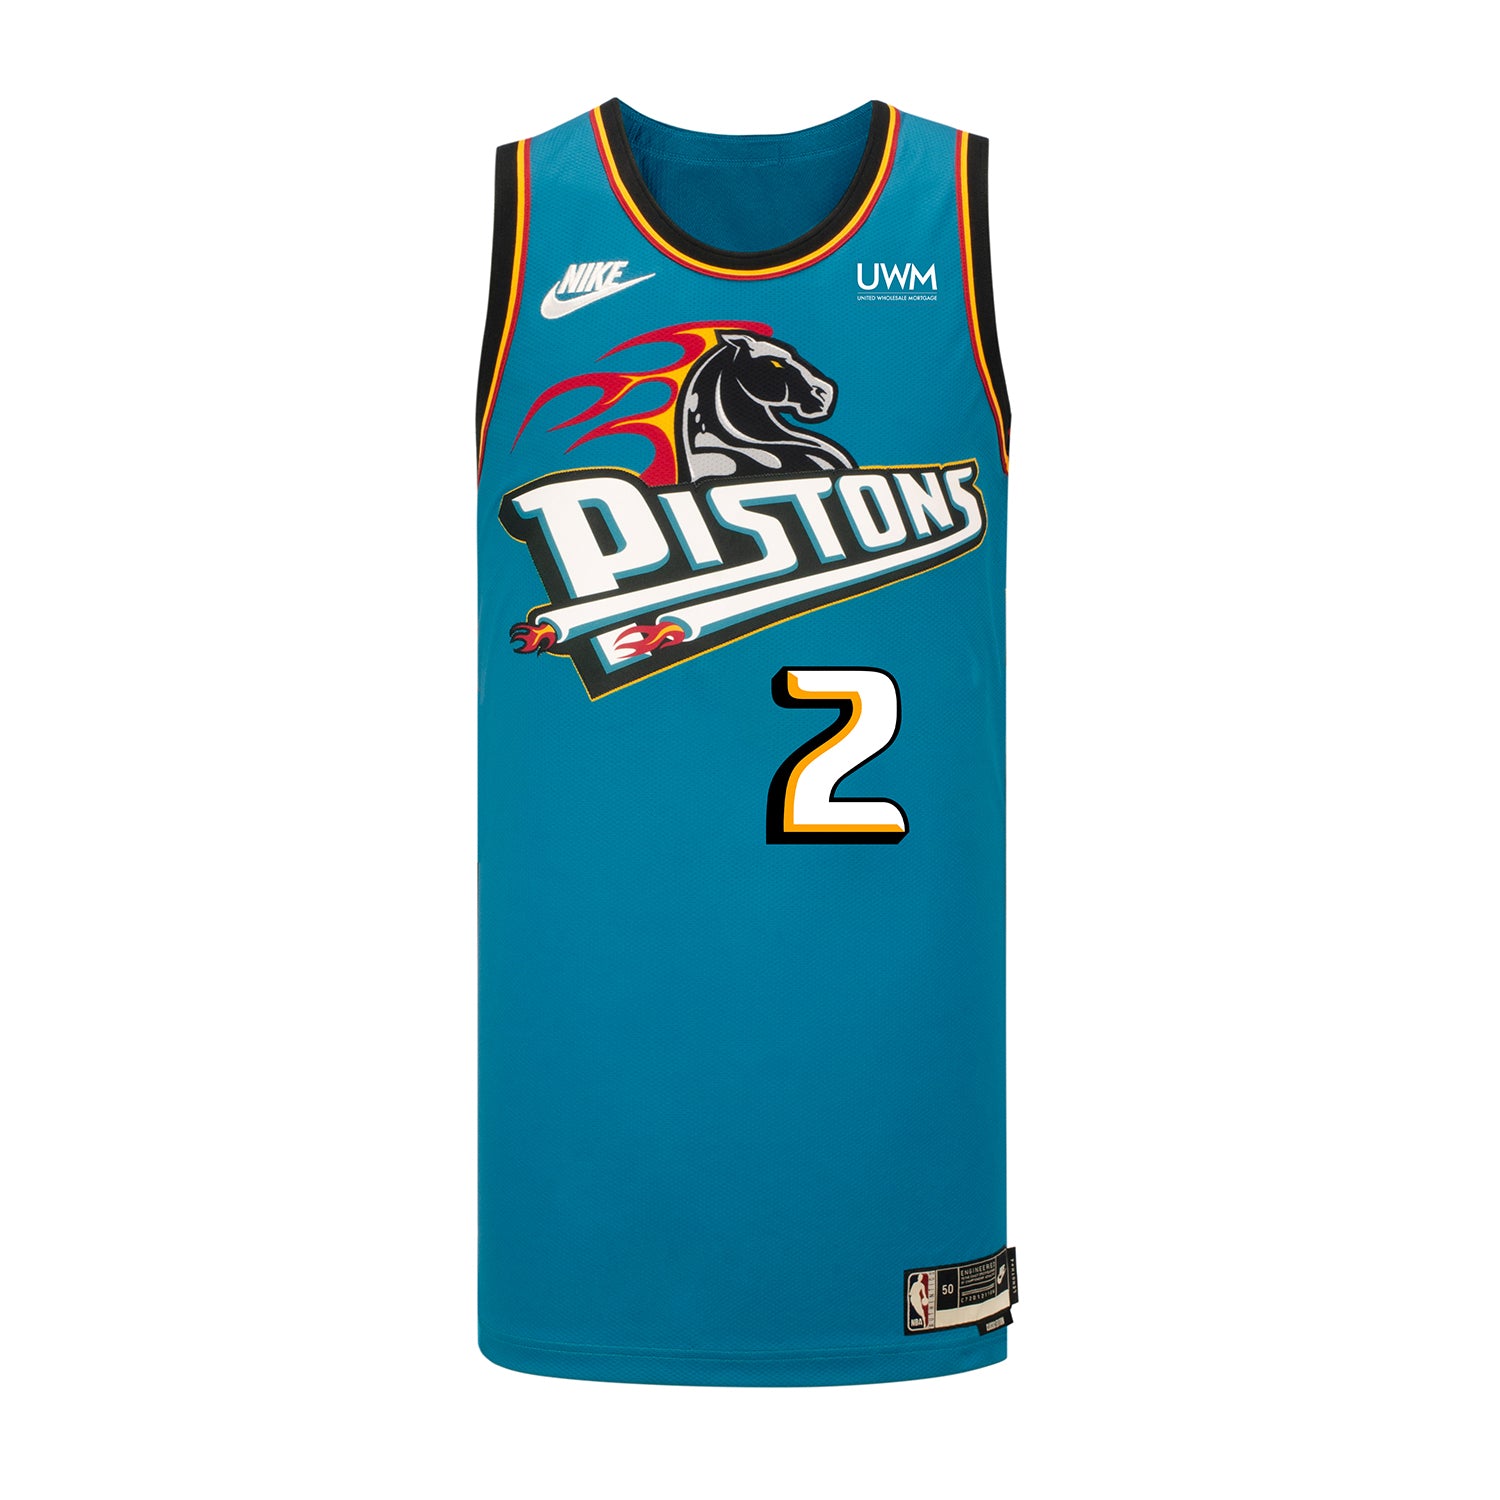 Hardwood Classic and Nike, Other, Youth Basketball Jersey